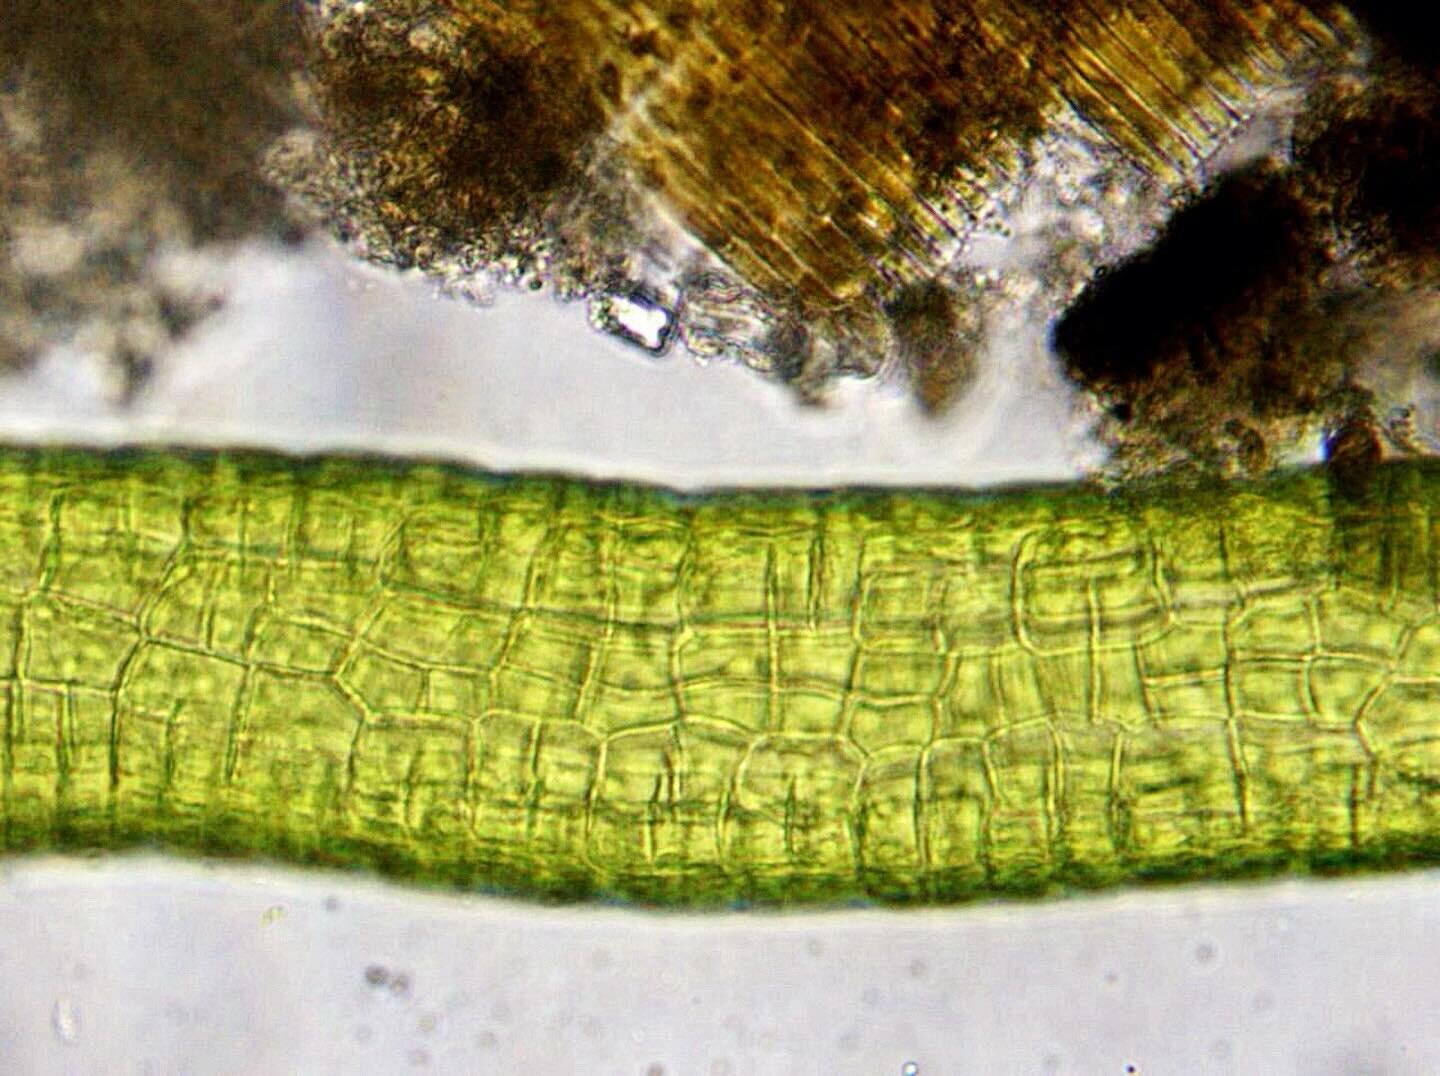 Plants, dirt, diatoms. 100x magnification. Brightfield.
.
Just a pretty little filler photo for this week&rsquo;s posts.
.
.
.
#microscopy #science #nature #biology #biodiversity #scicomm #sciart #microbiology #botany #plants #diatoms #underwaterphot